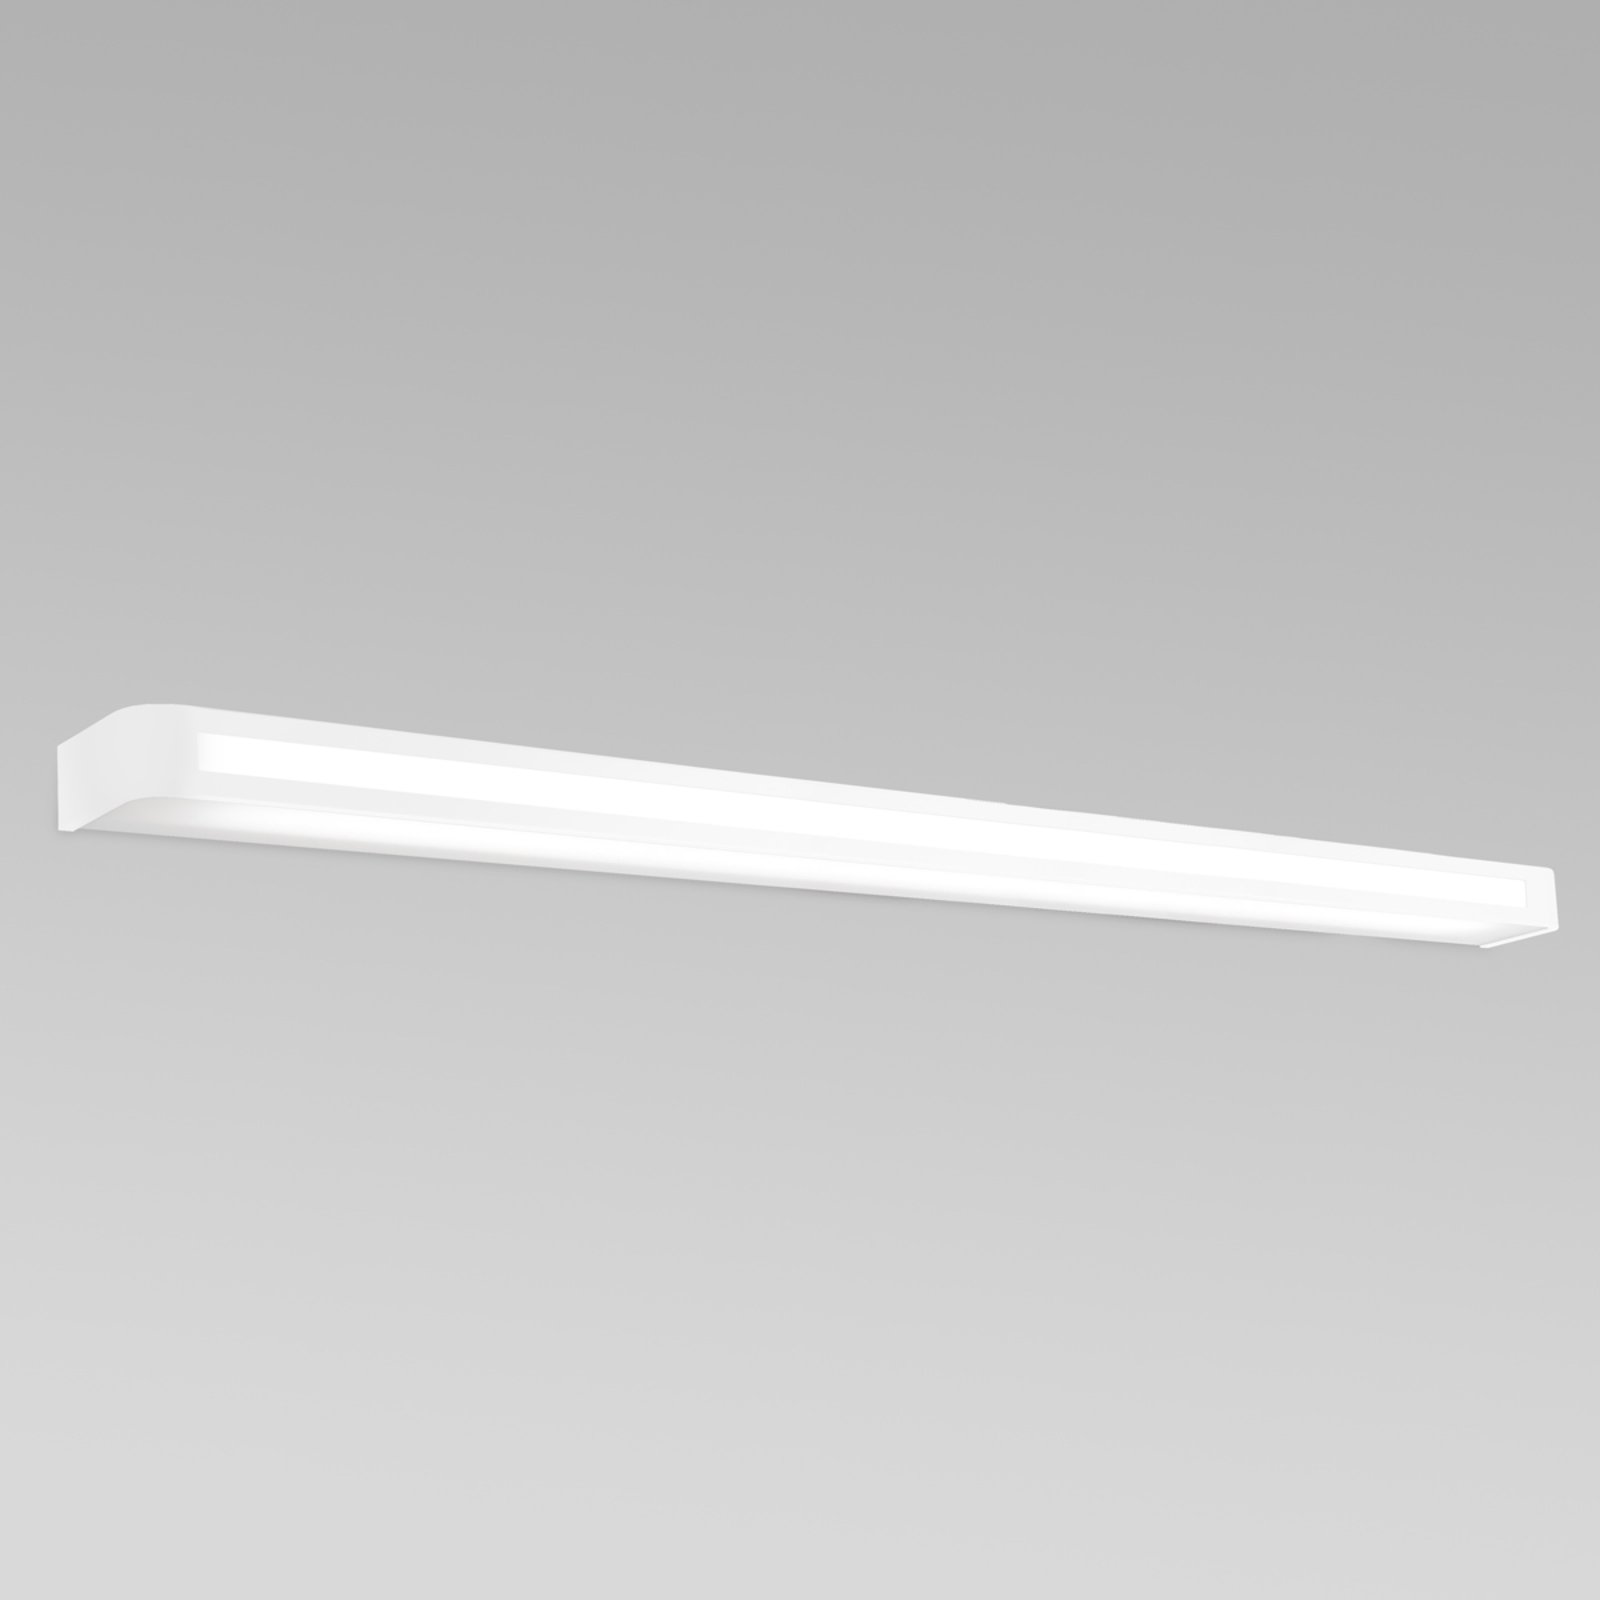 Timeless LED wall light Arcos, IP20, 120 cm, white